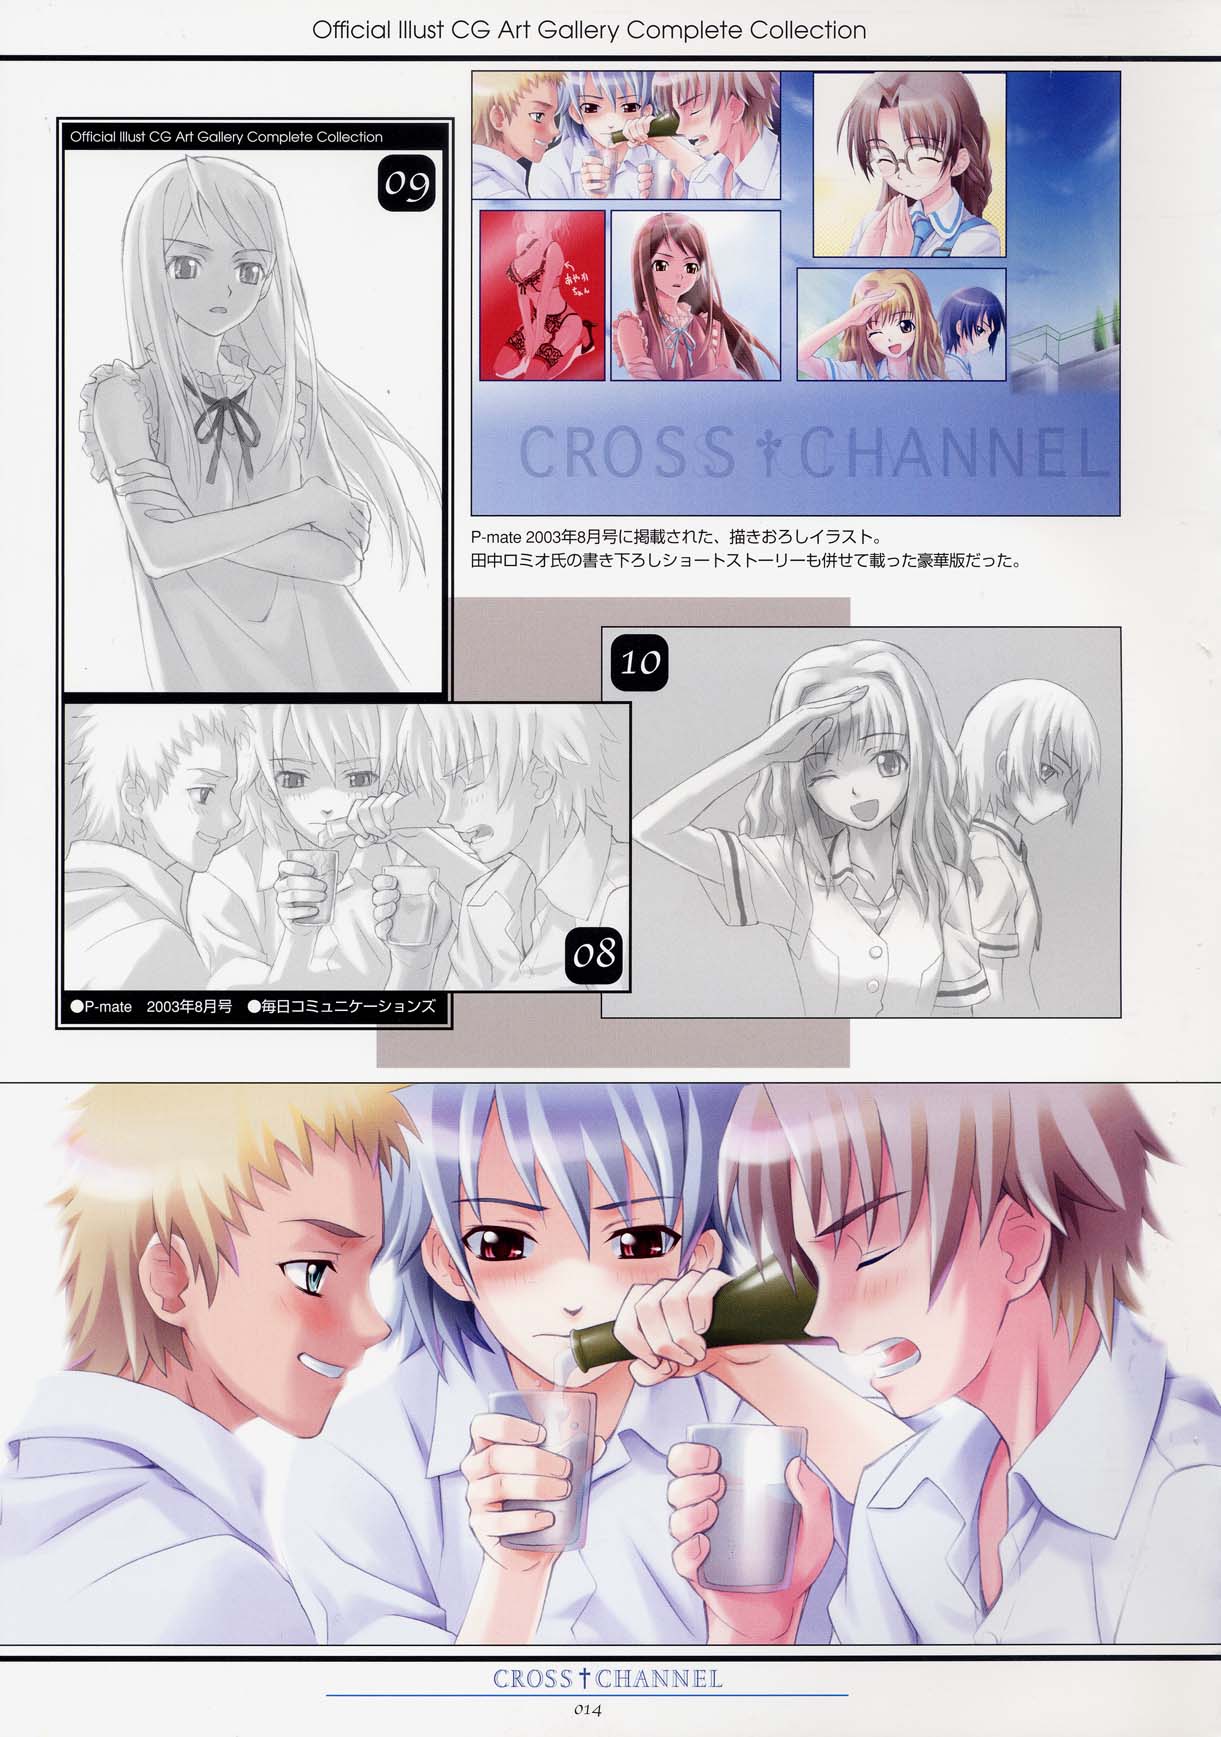 [FlyingShine (Matsuryuu)] CROSS&dagger;CHANNEL Official Illust CG Art Gallery Complete Collection [FlyingShine (松竜)] CROSS&dagger;CHANNEL 公式設定資料集